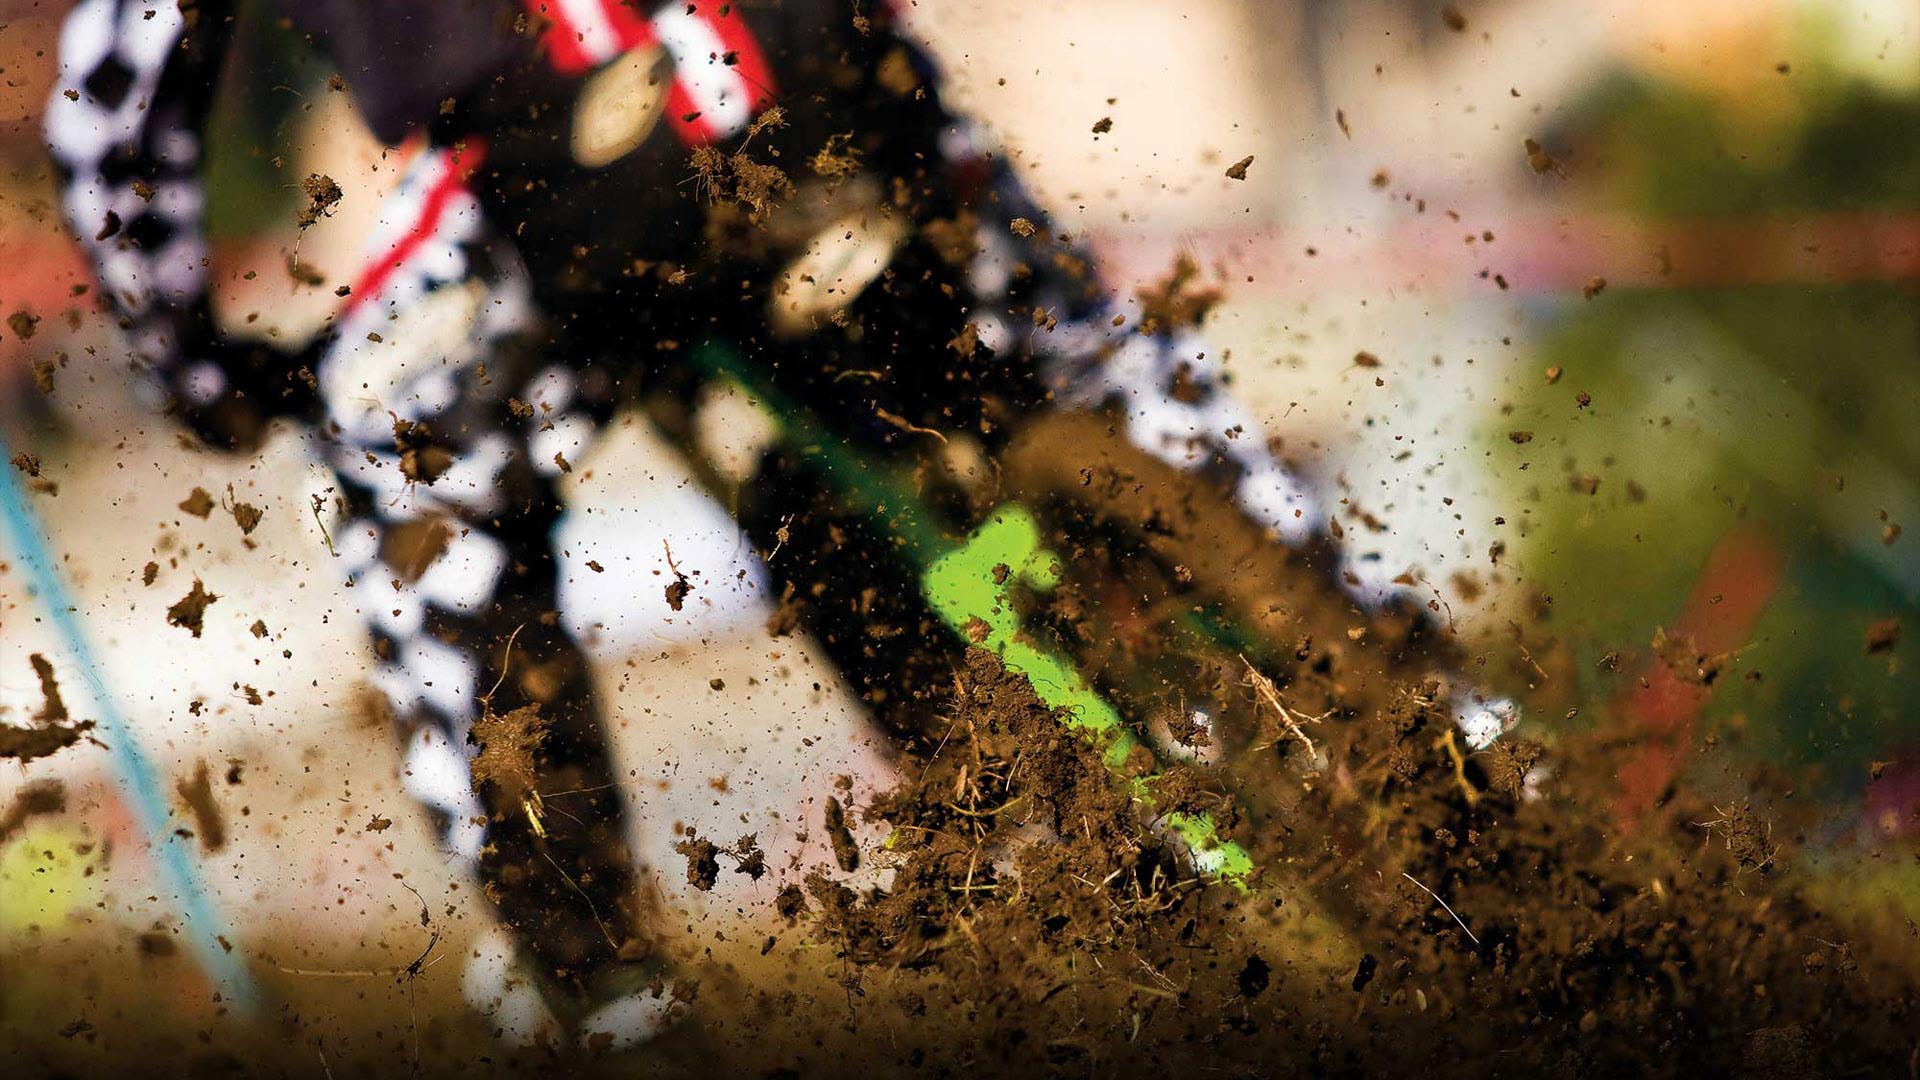 Bikes Backgrounds In High Quality: Motocross by Julie Naggar, 29 ...